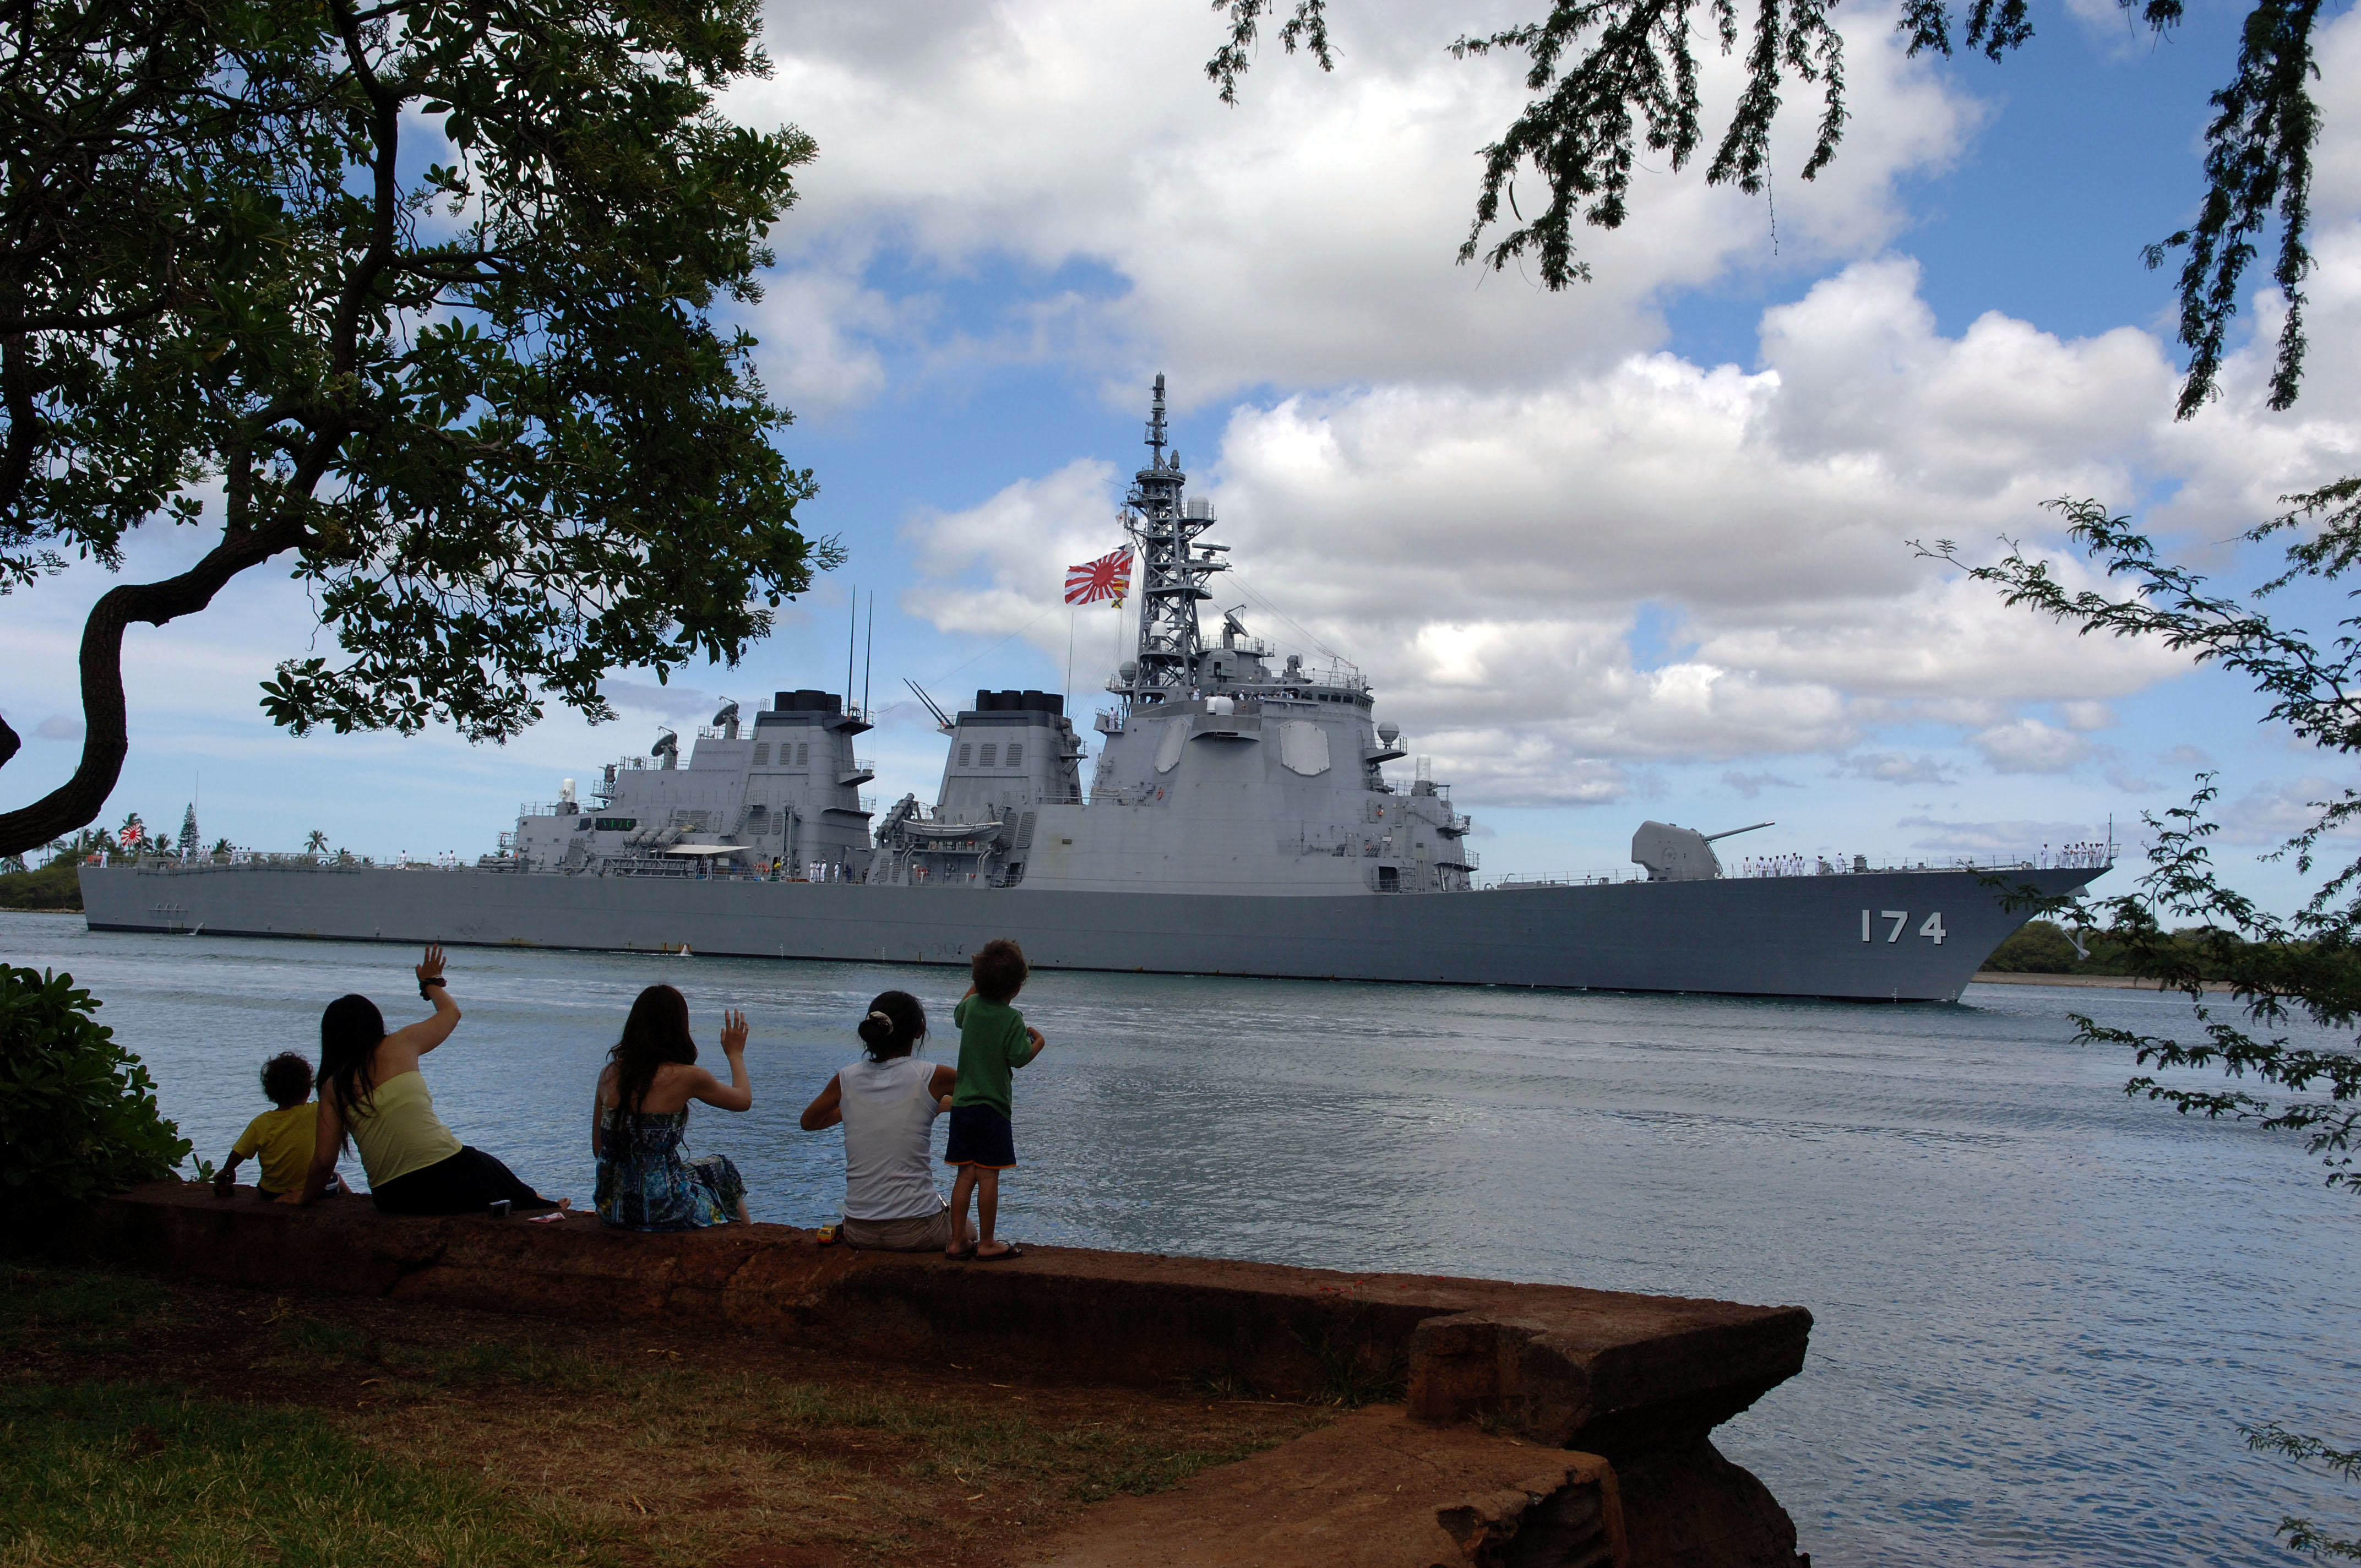 US_Navy_080626-N-3931M-019_The_Japanese_Maritime_Self_Defense_Force_ship_JS_Kirishima_(DD_174)_pulls_into_Pearl_harbor_for_a_scheduled_port_call_before_starting_Rim_of_the_Pacific_(RIMPAC)_2008.jpg